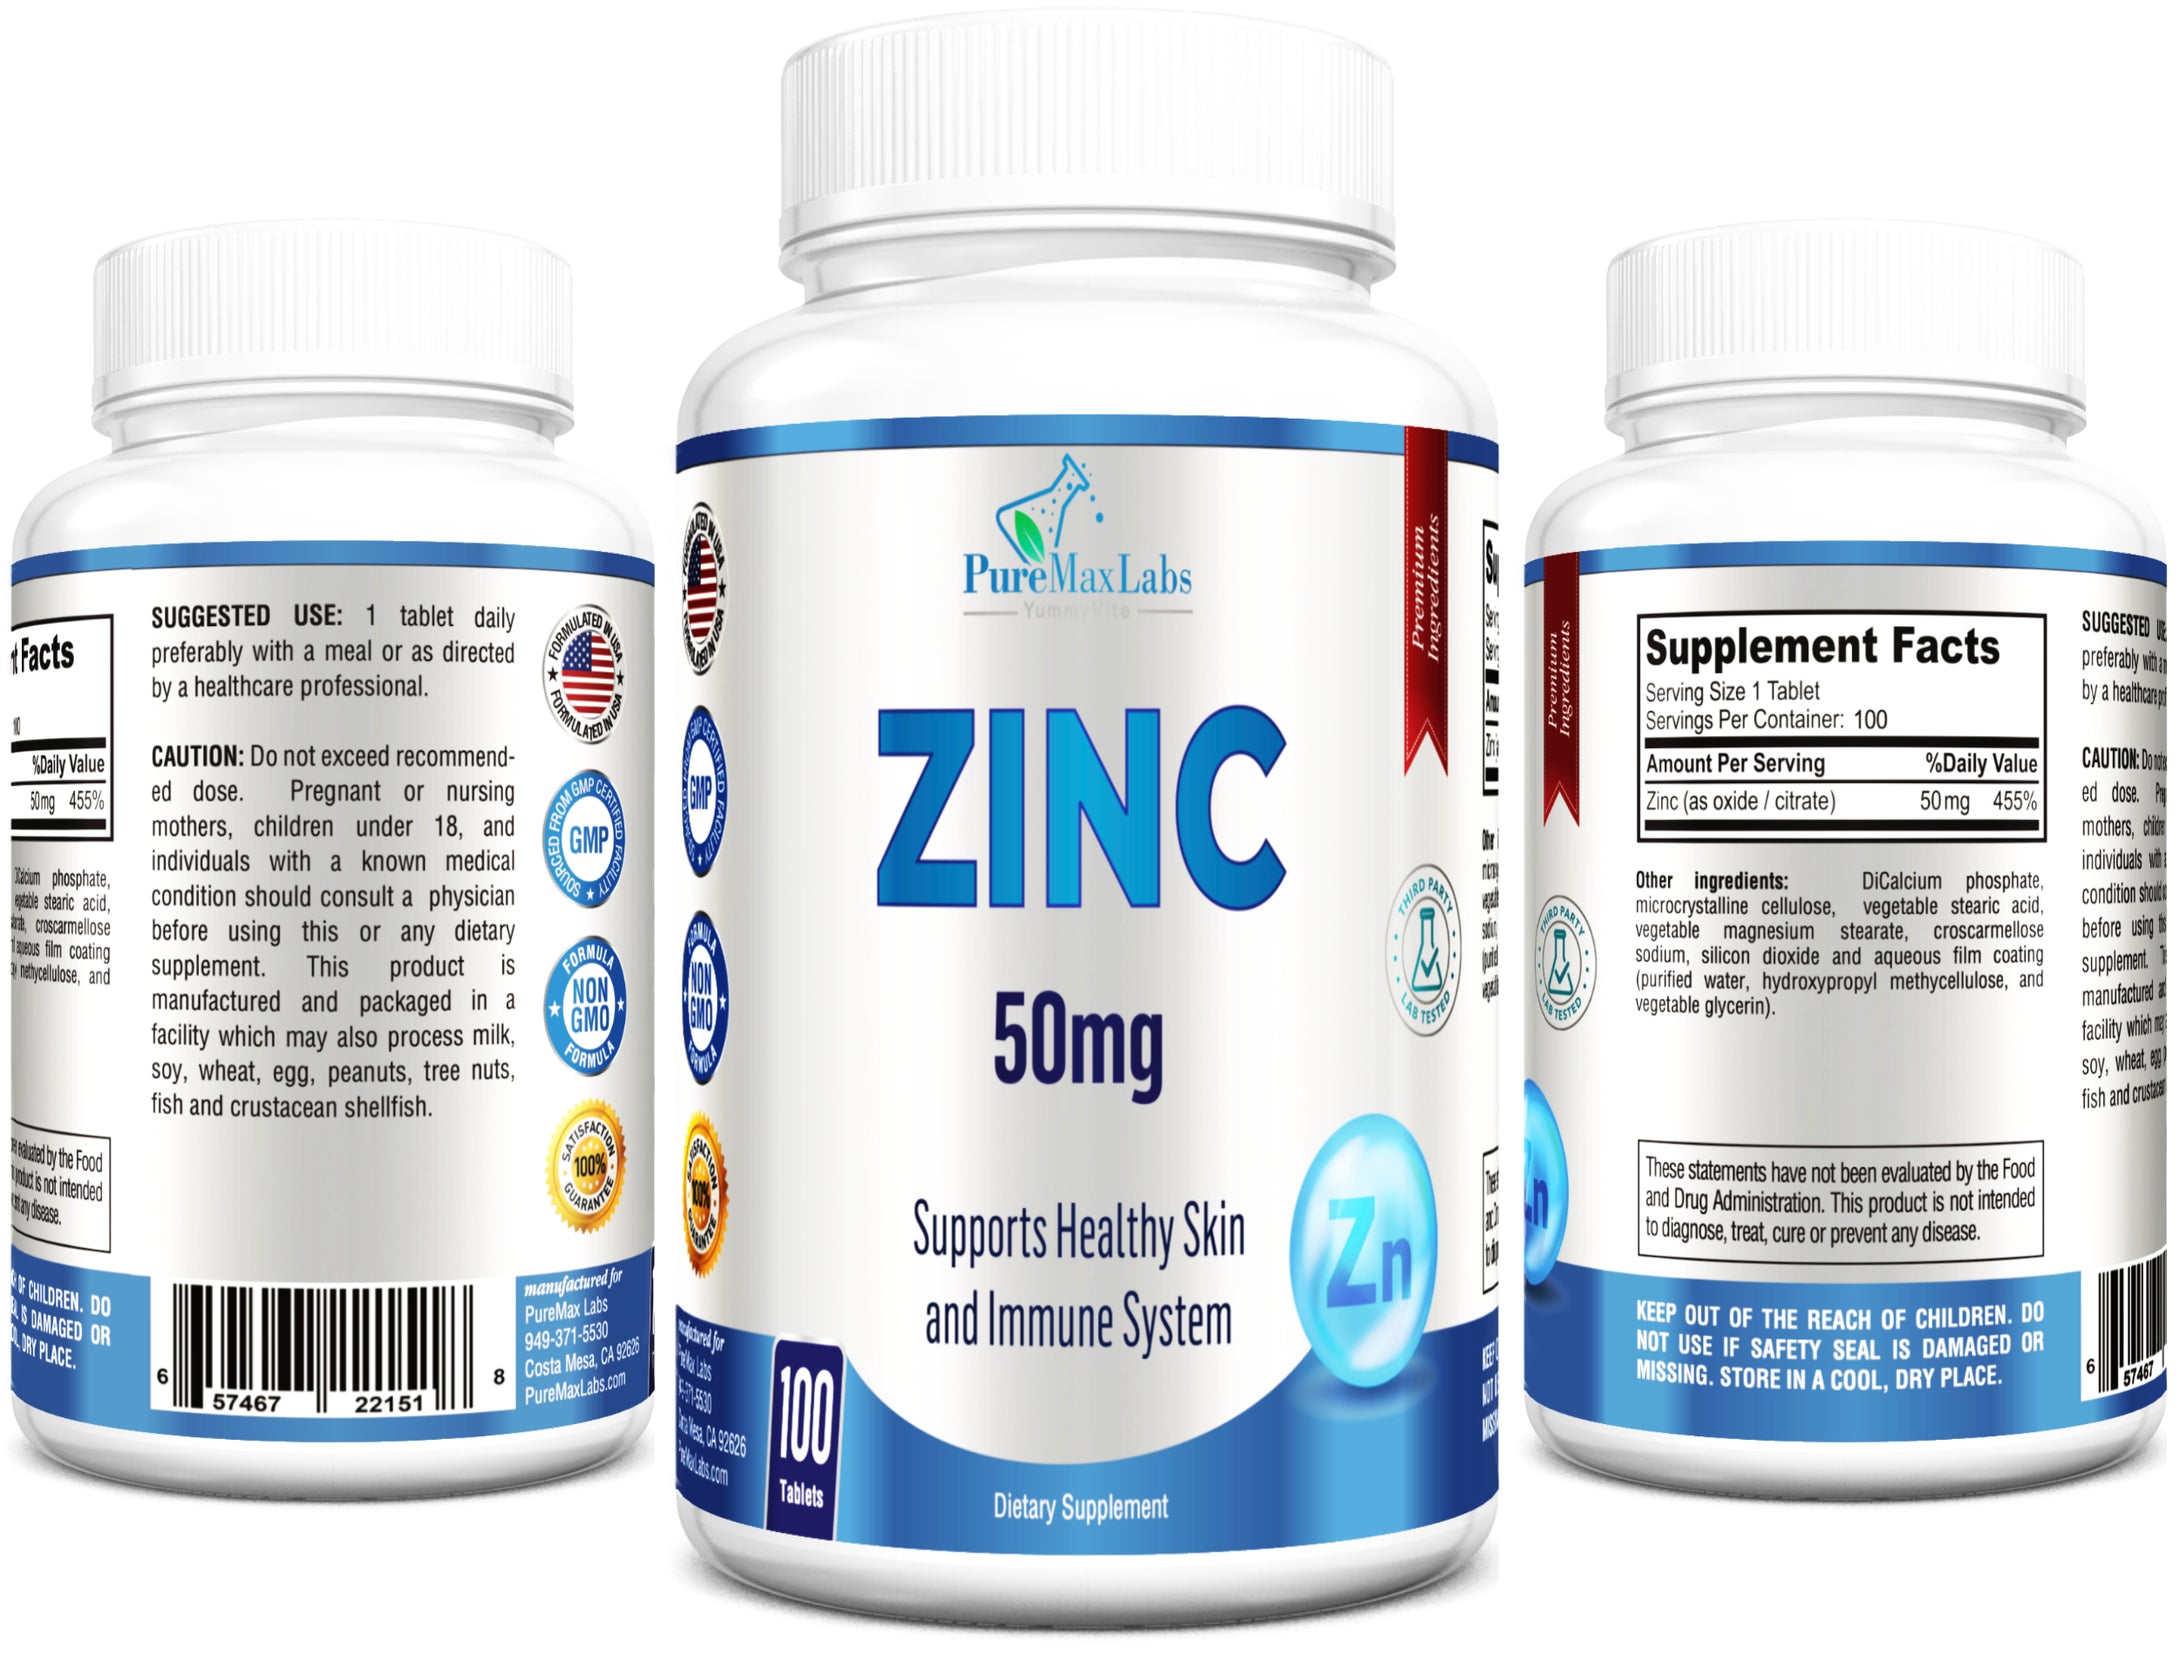 Zinc Citrate/Oxide 50mg - Immune Support Supplement - 100 Tablets